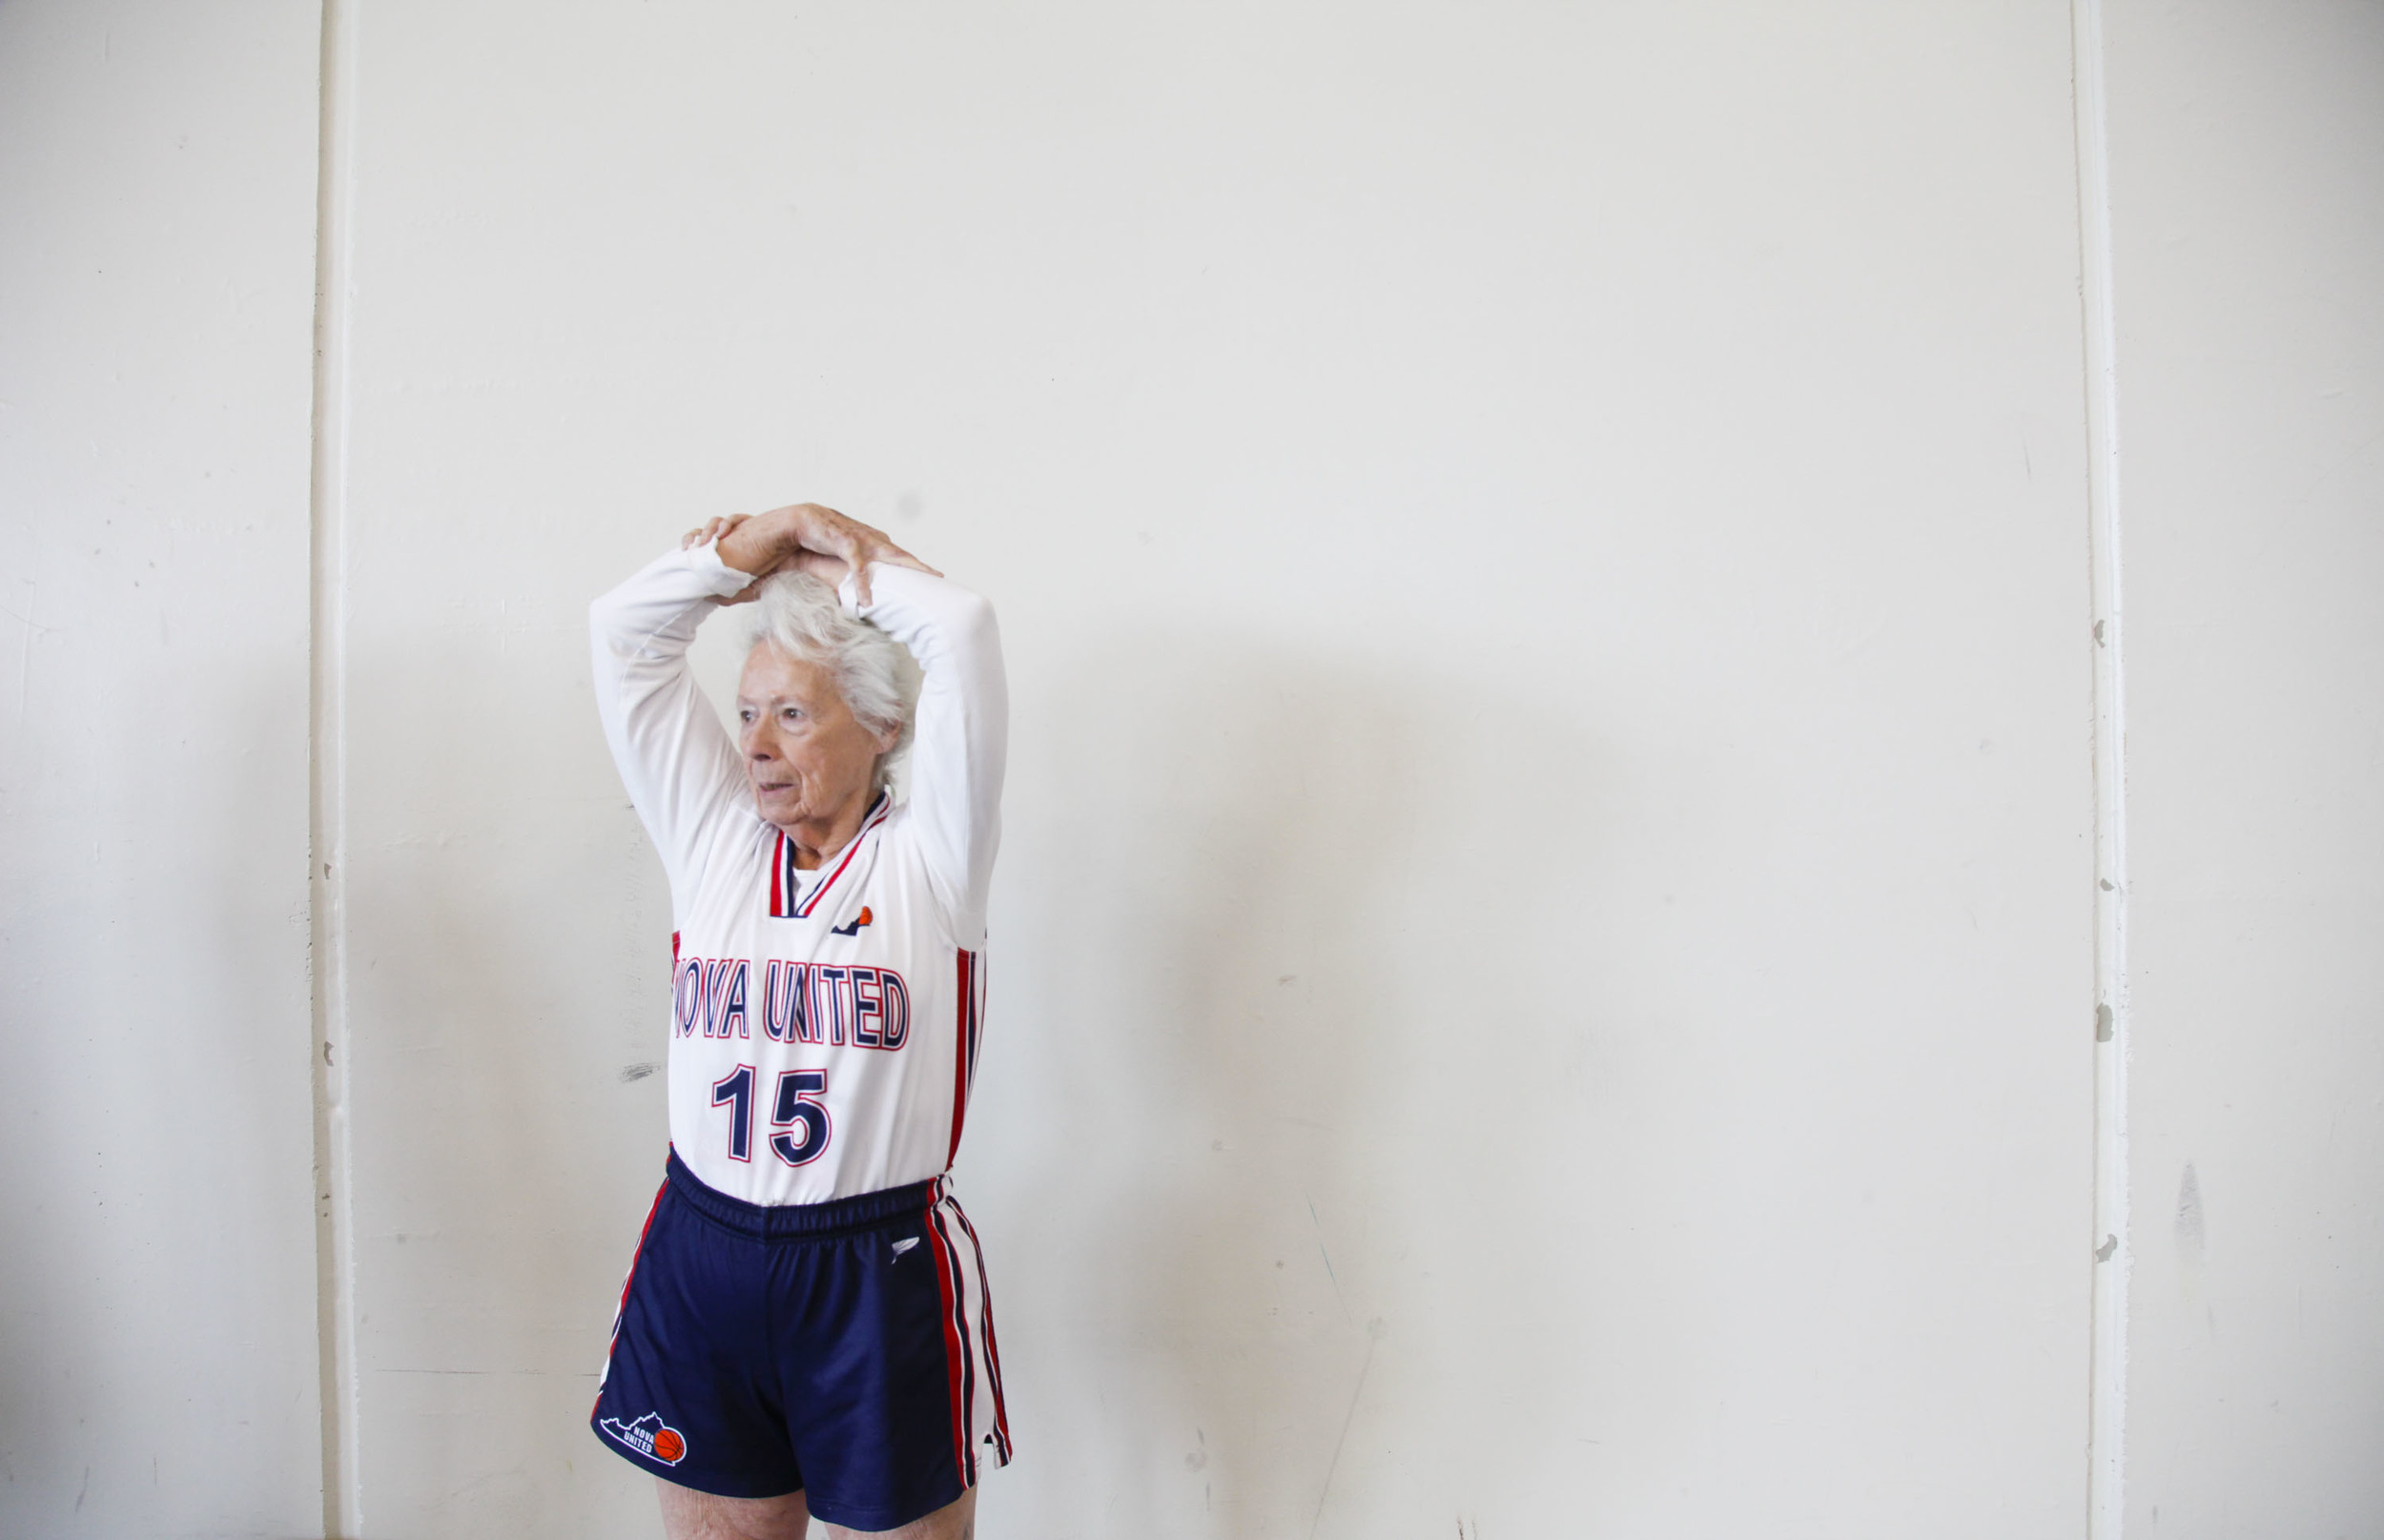  Judith Winston of the &nbsp;NOVA United Classics stretches before her game during the National Senior Games basketball competition. This competition took place at the St. Thomas University Basketball Court in St. Paul, MN. on Jul. 9, 2015. &nbsp; 